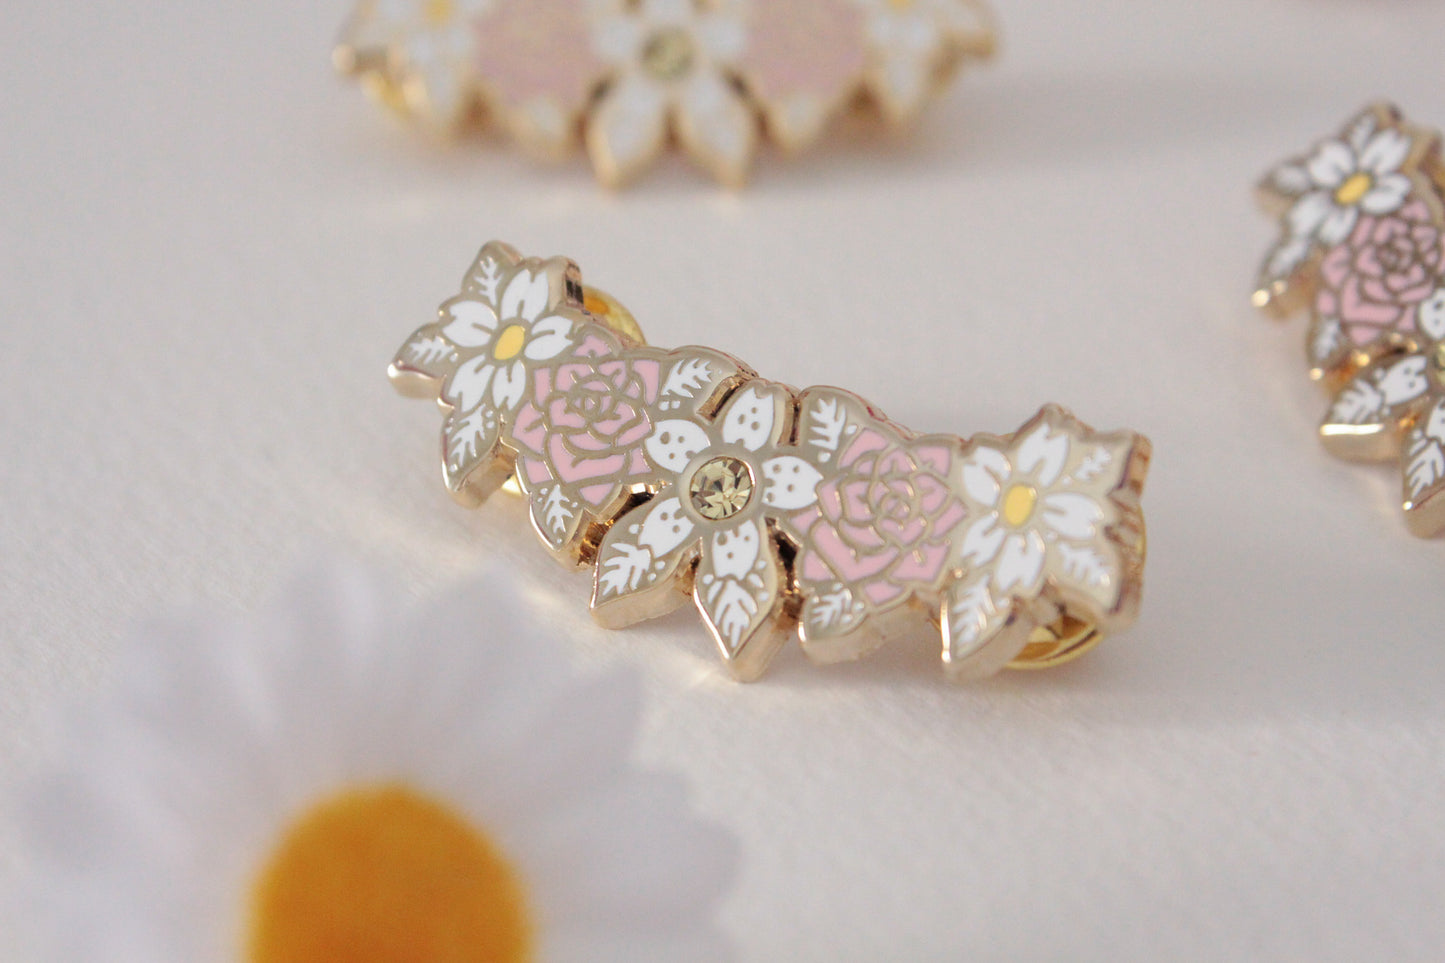 Blooming Beauty: Floral Wreath Enamel Pin - Elegant accessory for shirts, blouses, jackets and more!